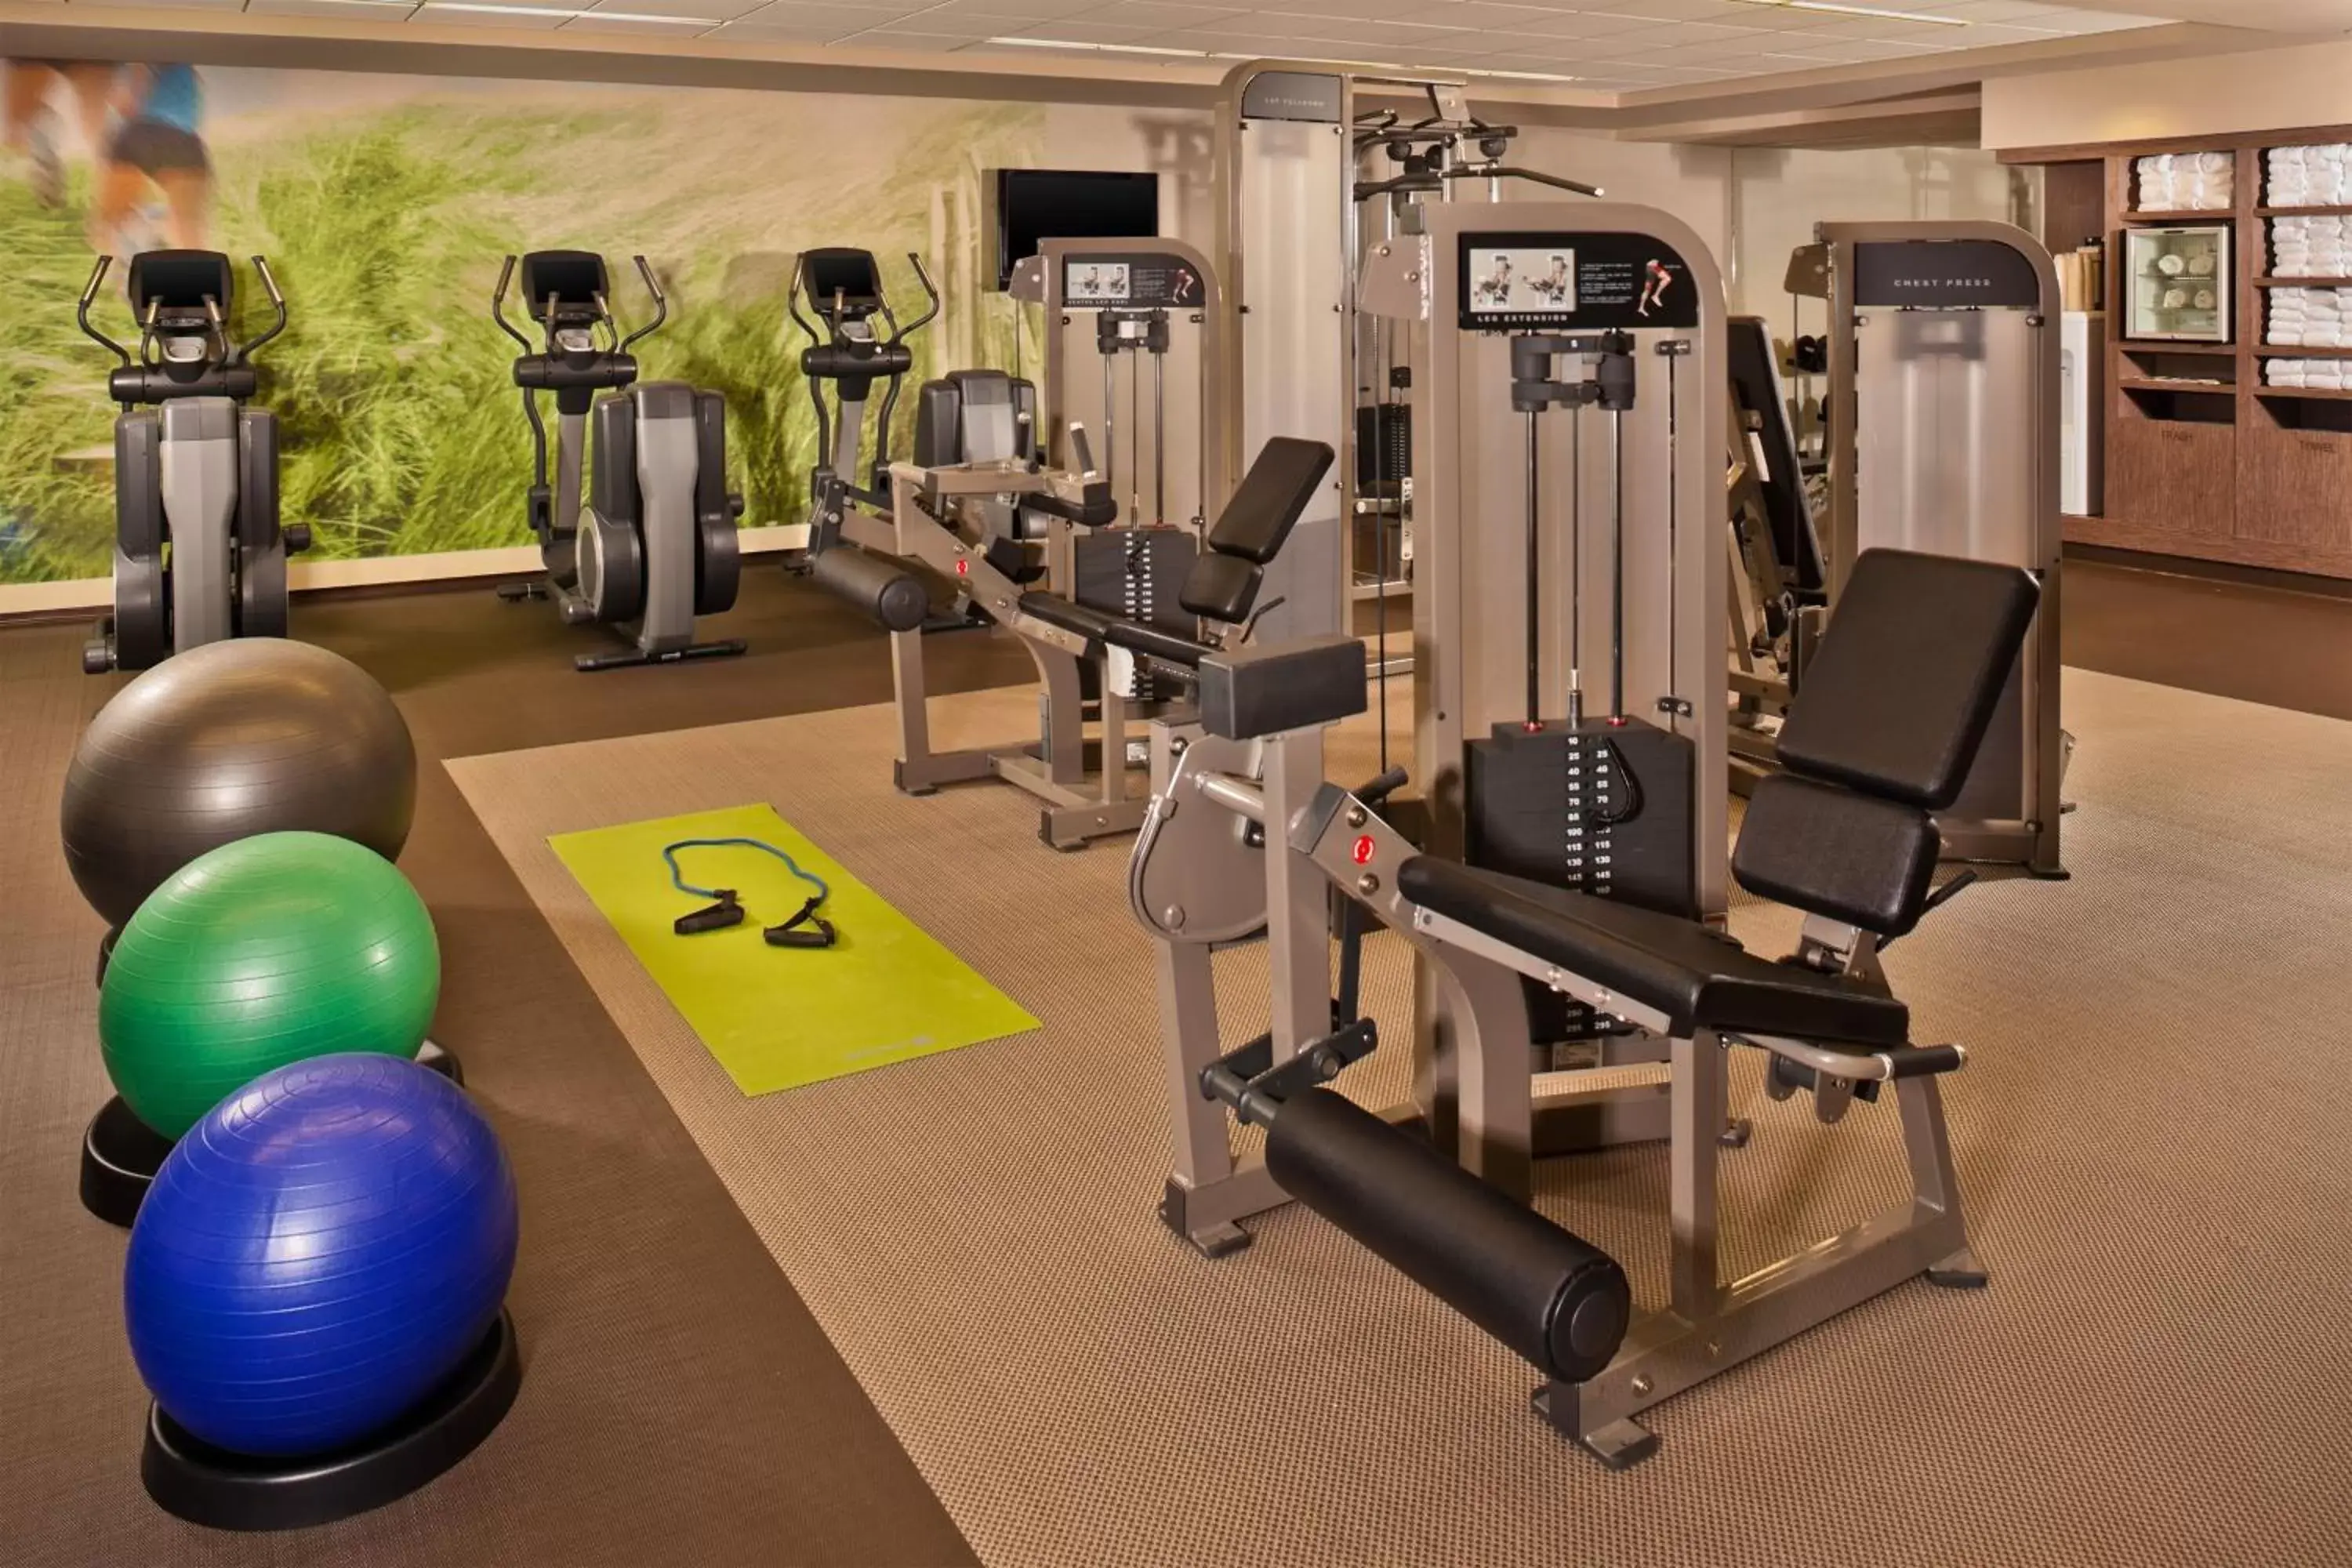 Fitness centre/facilities, Fitness Center/Facilities in The Westin Book Cadillac Detroit